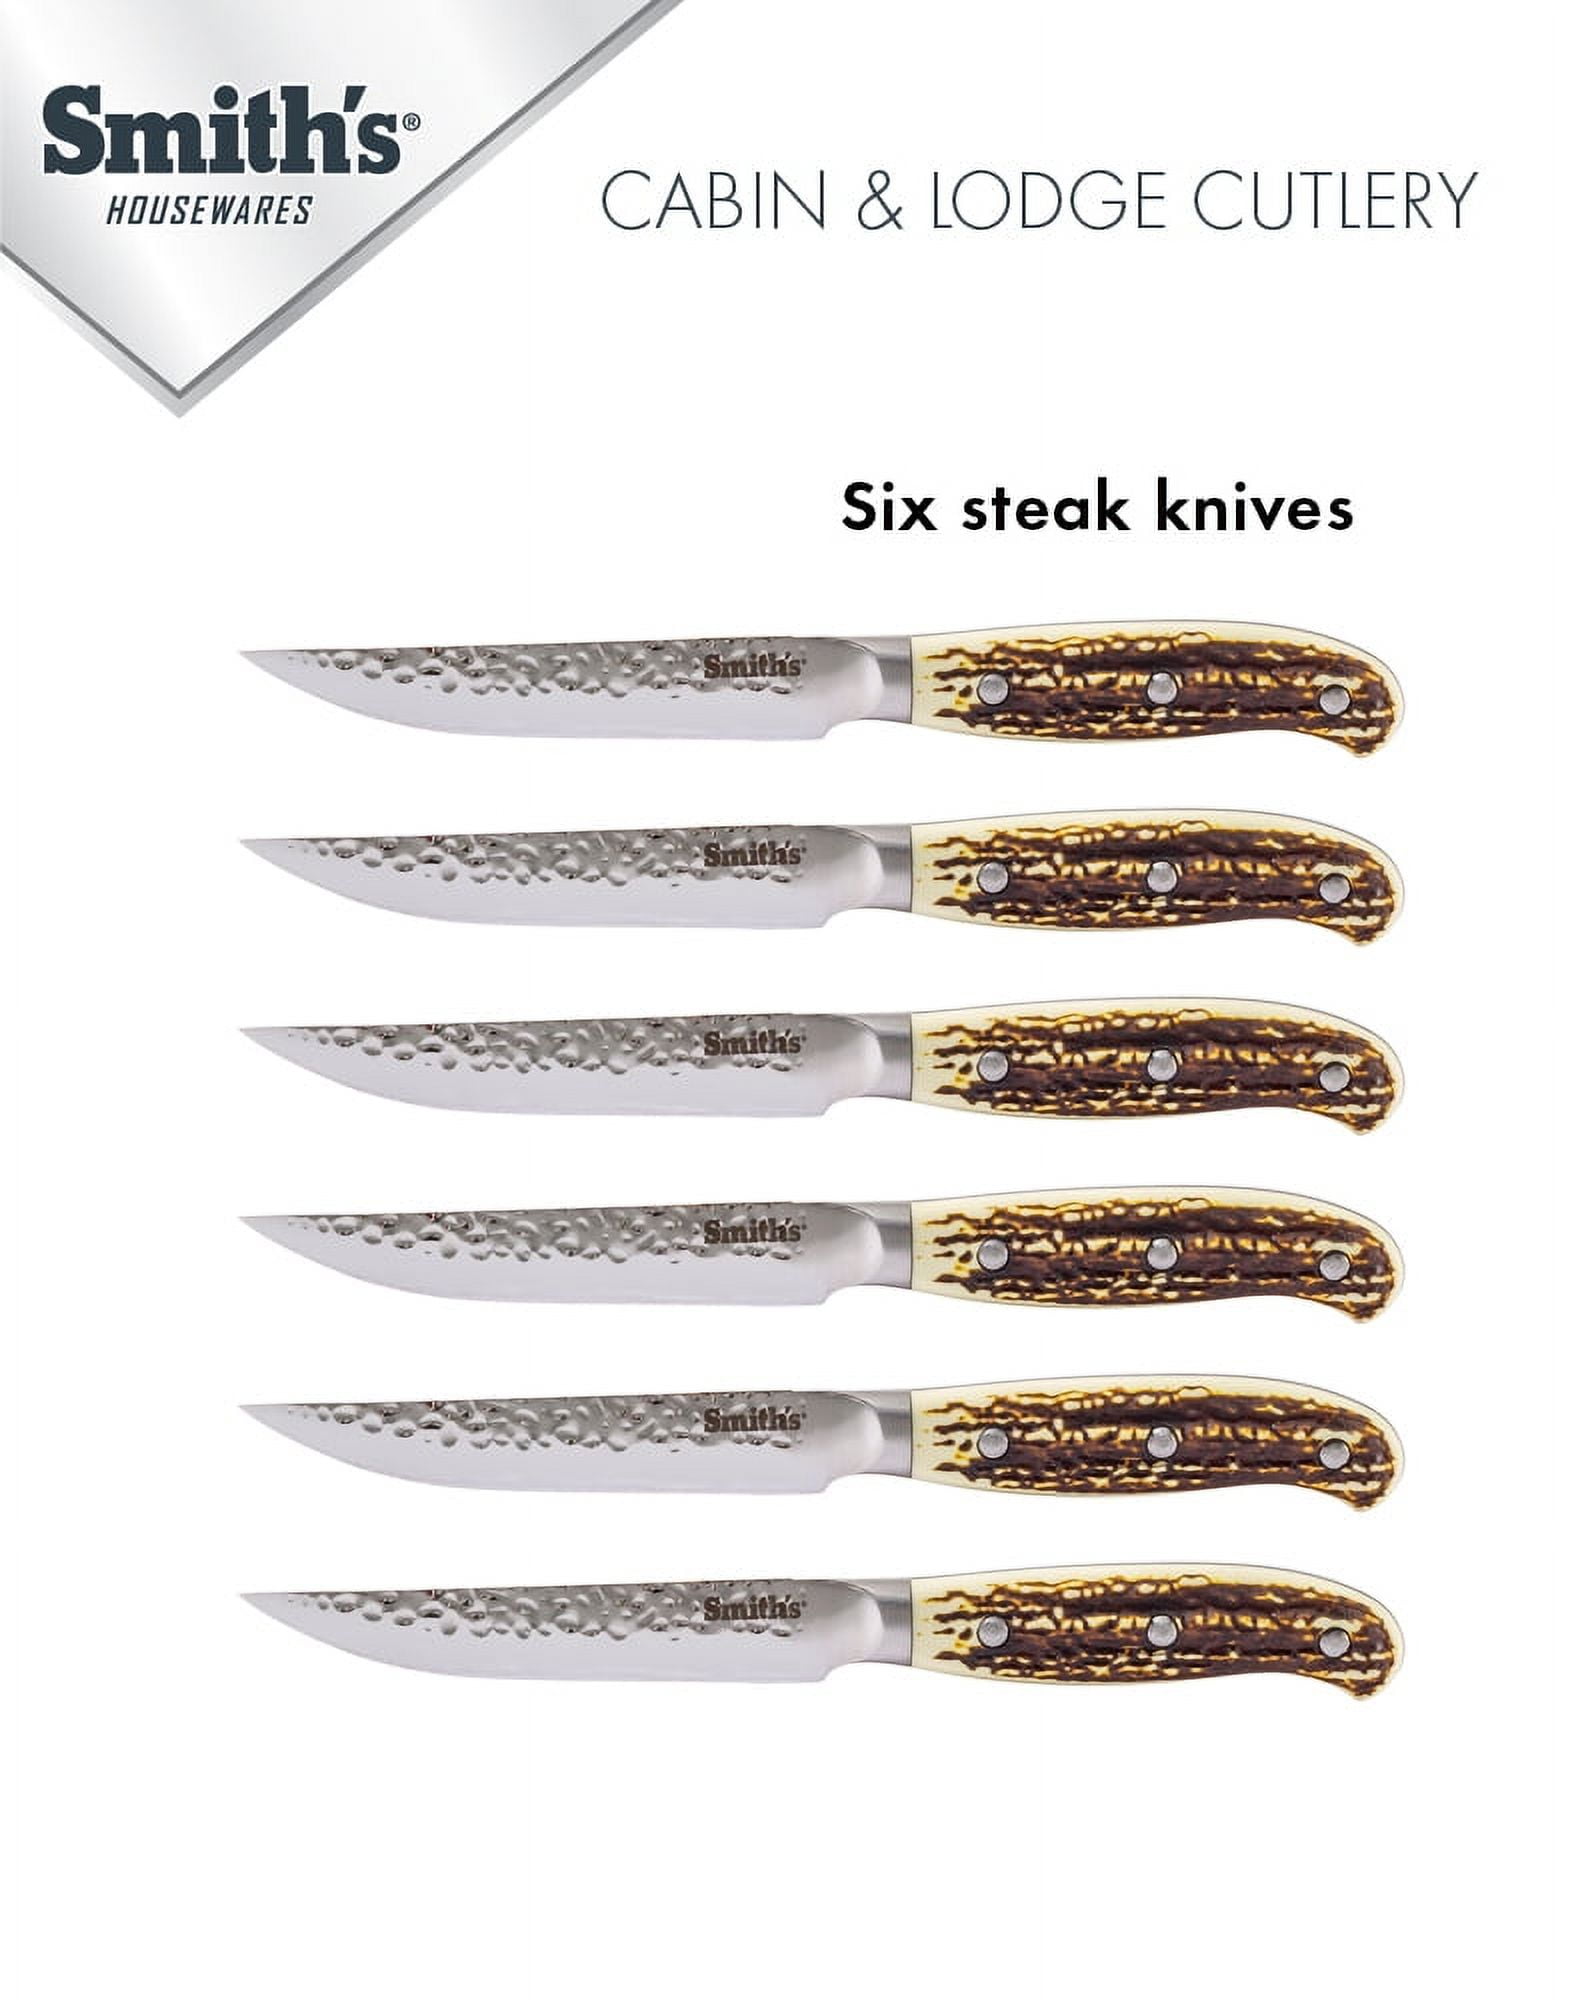 Smith's Consumer Products Store. CABIN & LODGE CUTLERY 7-PCS STEAK BLOCK SET